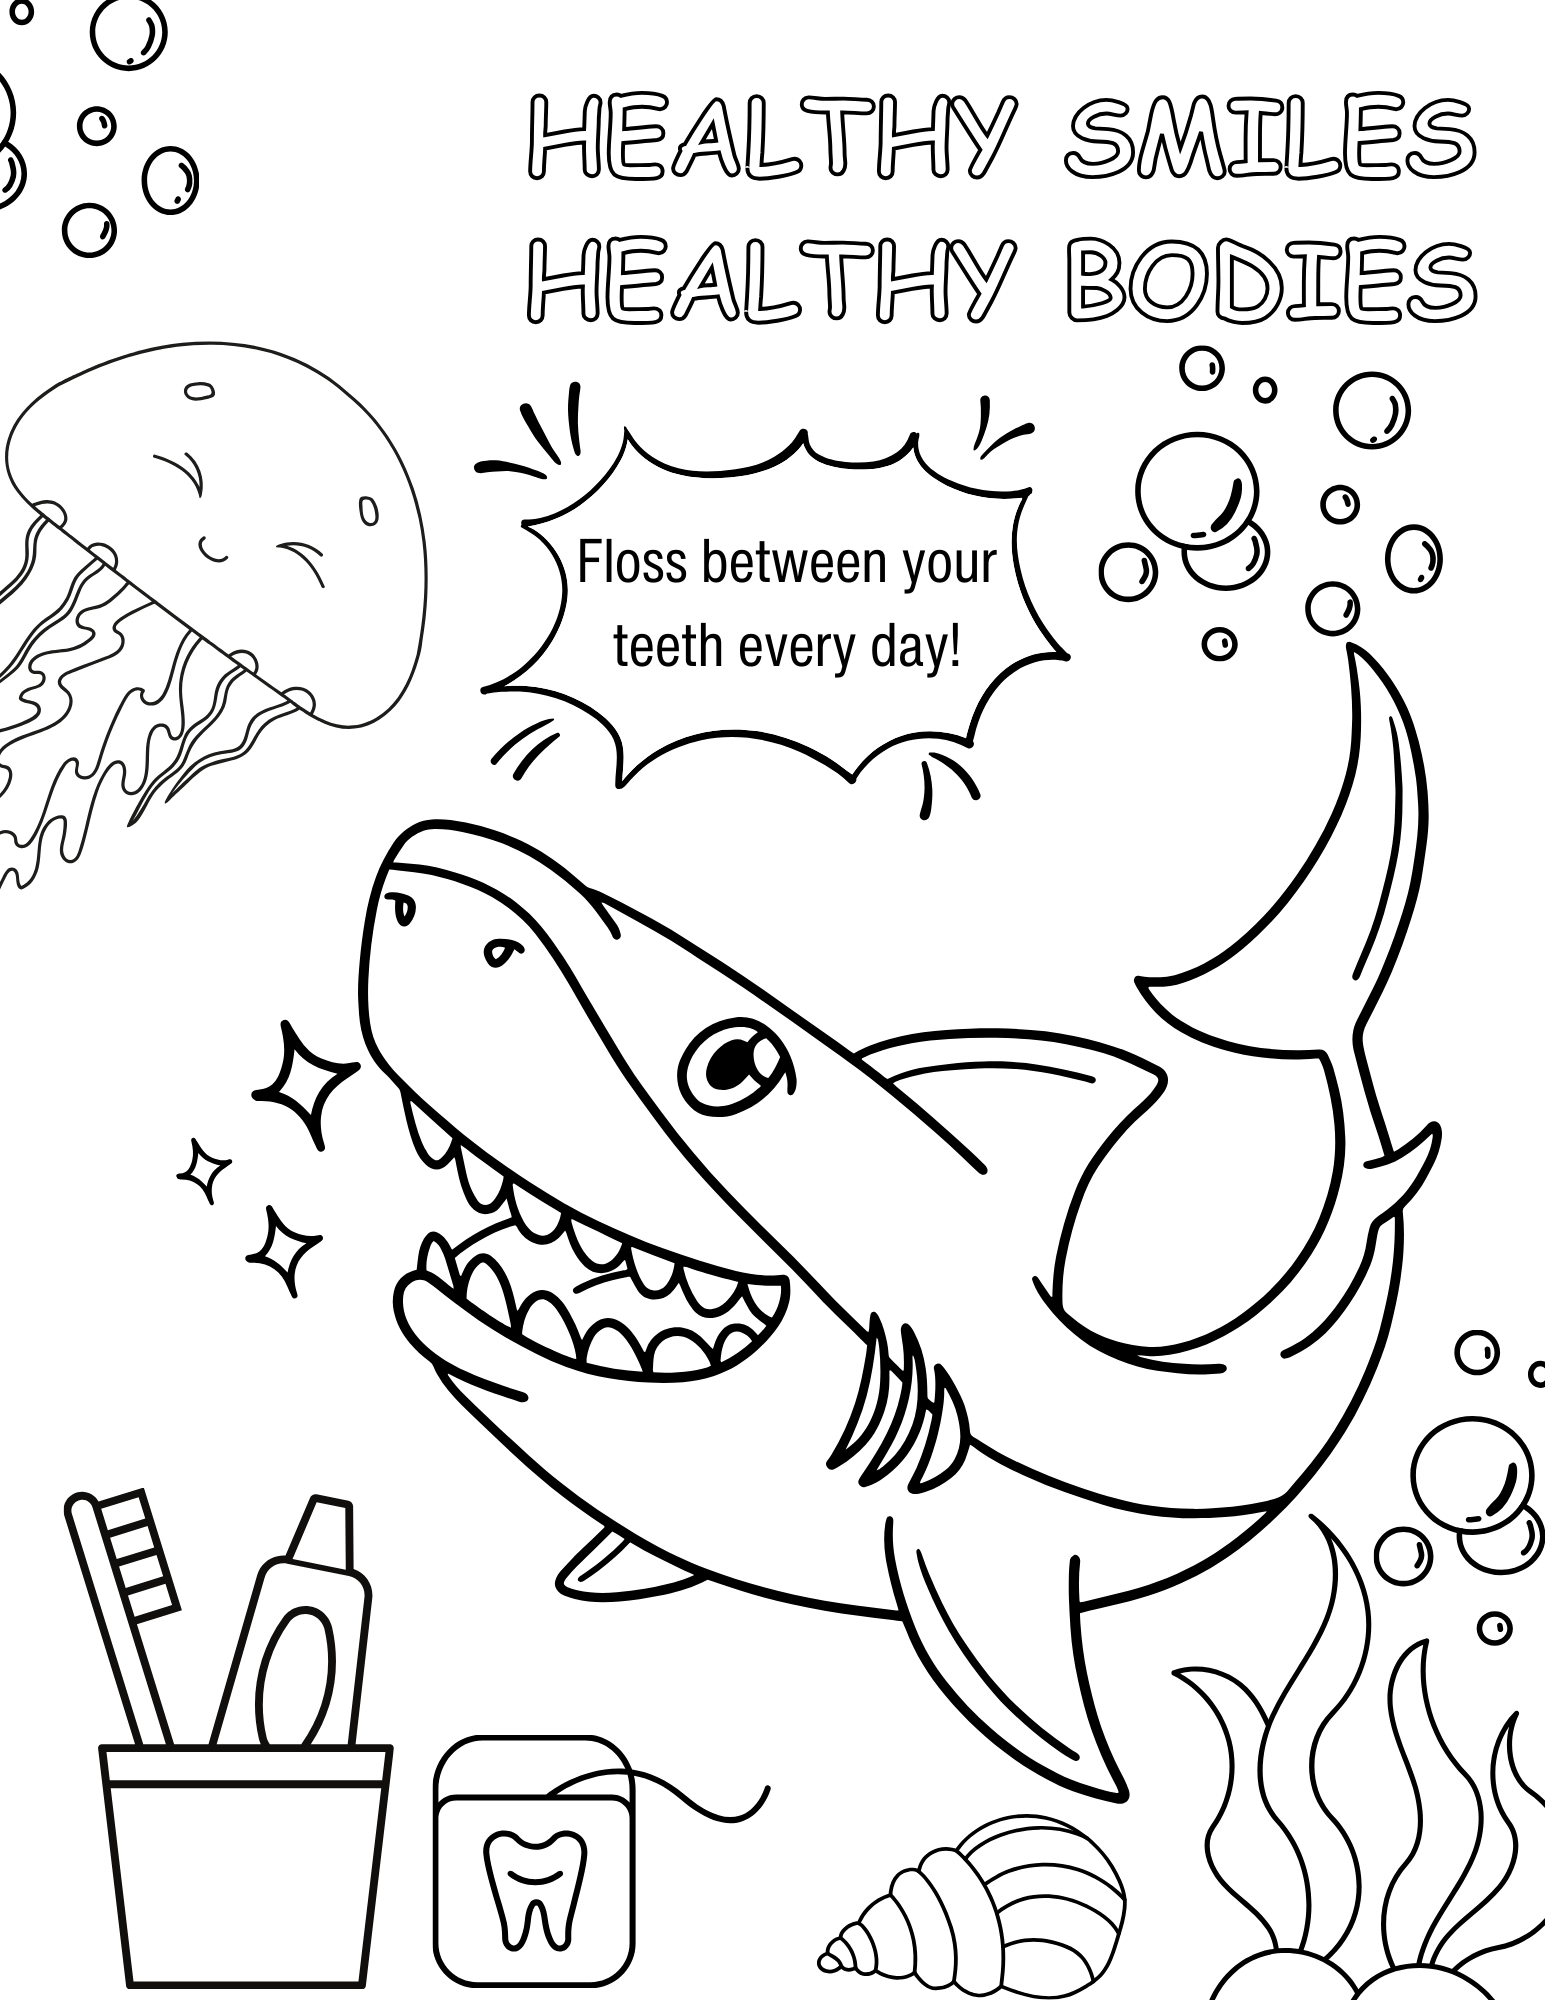 CDHM Coloring Pages Thumbnail.png